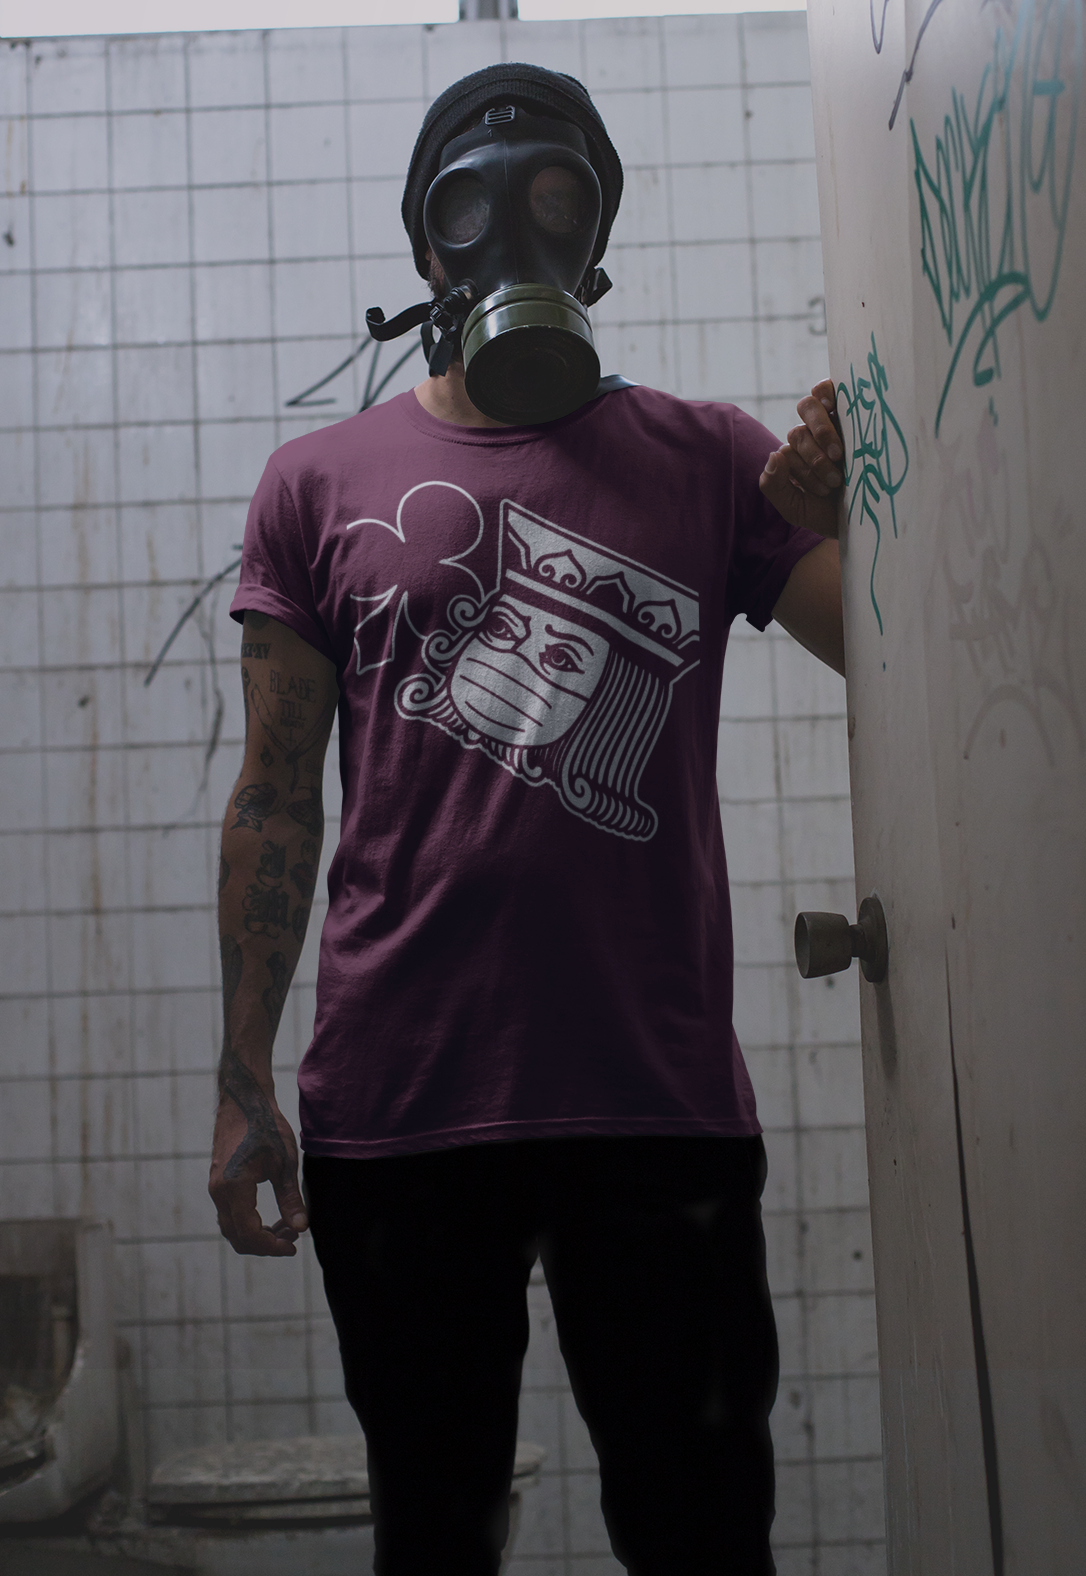 King of Clubs, Wearing Face Mask, Mens T-Shirt (Anti-COVID-19)